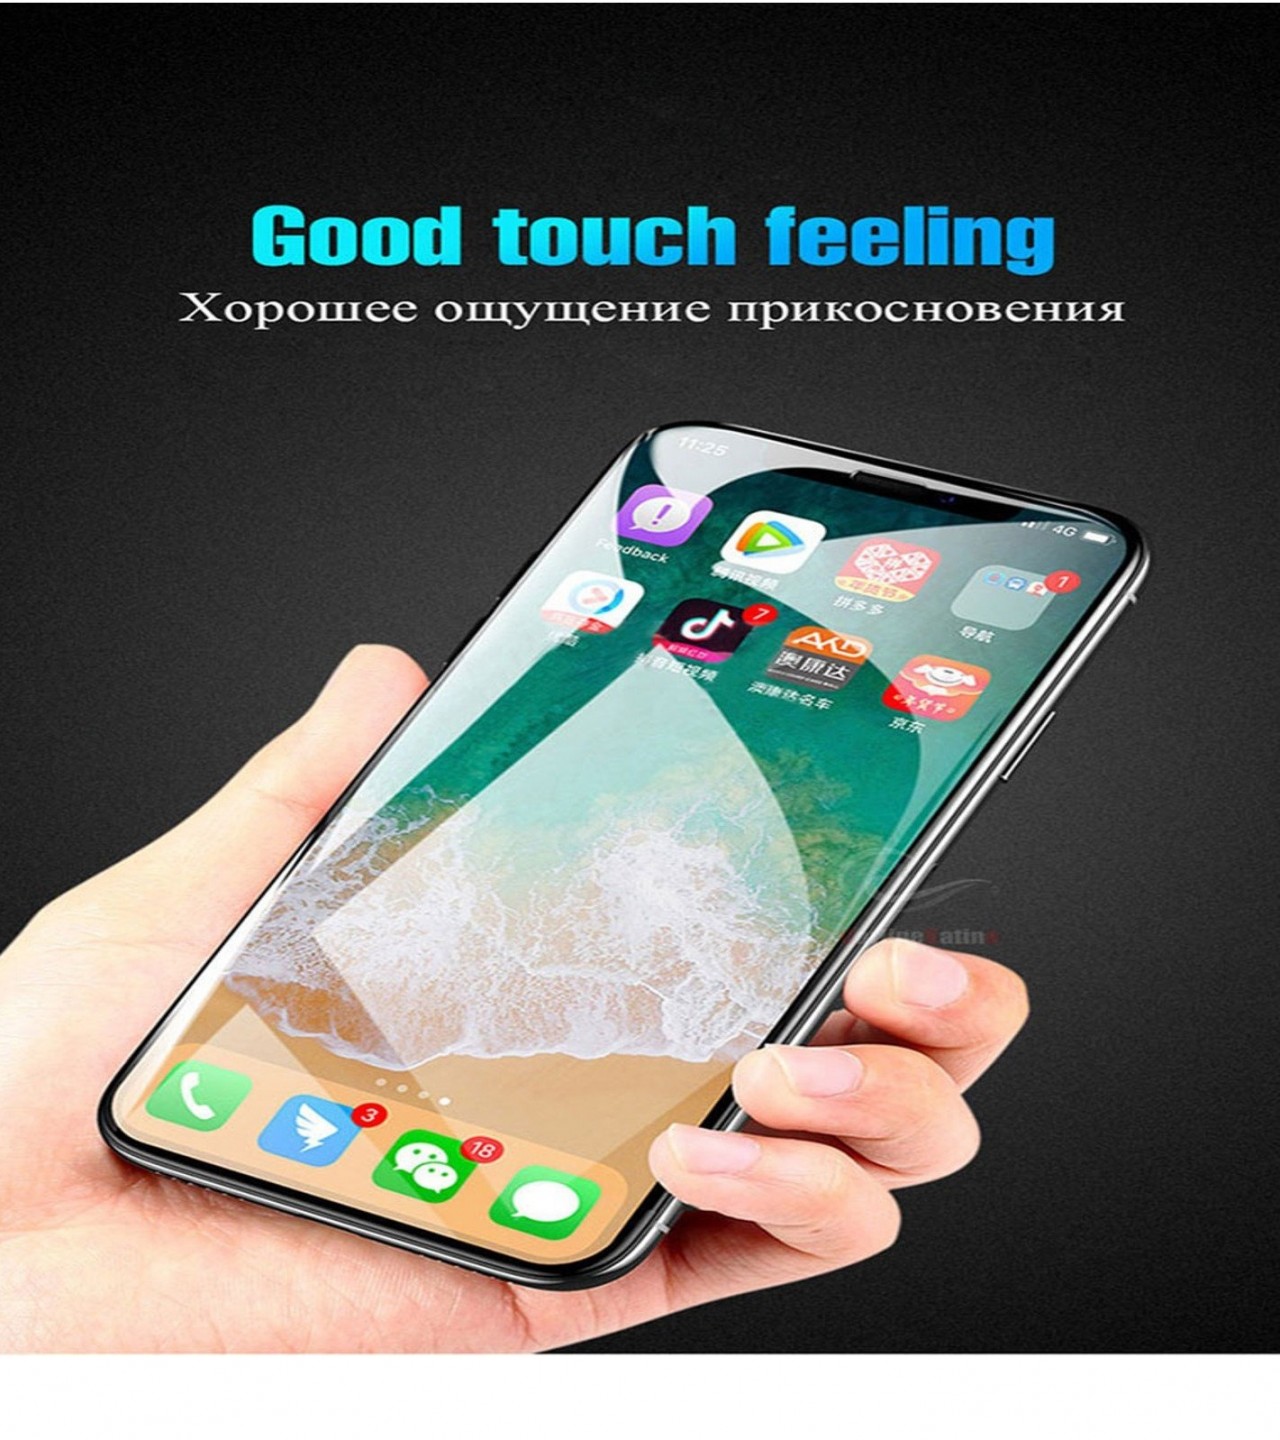 9D Tempered Glass for iPhone 7 Plus  P105